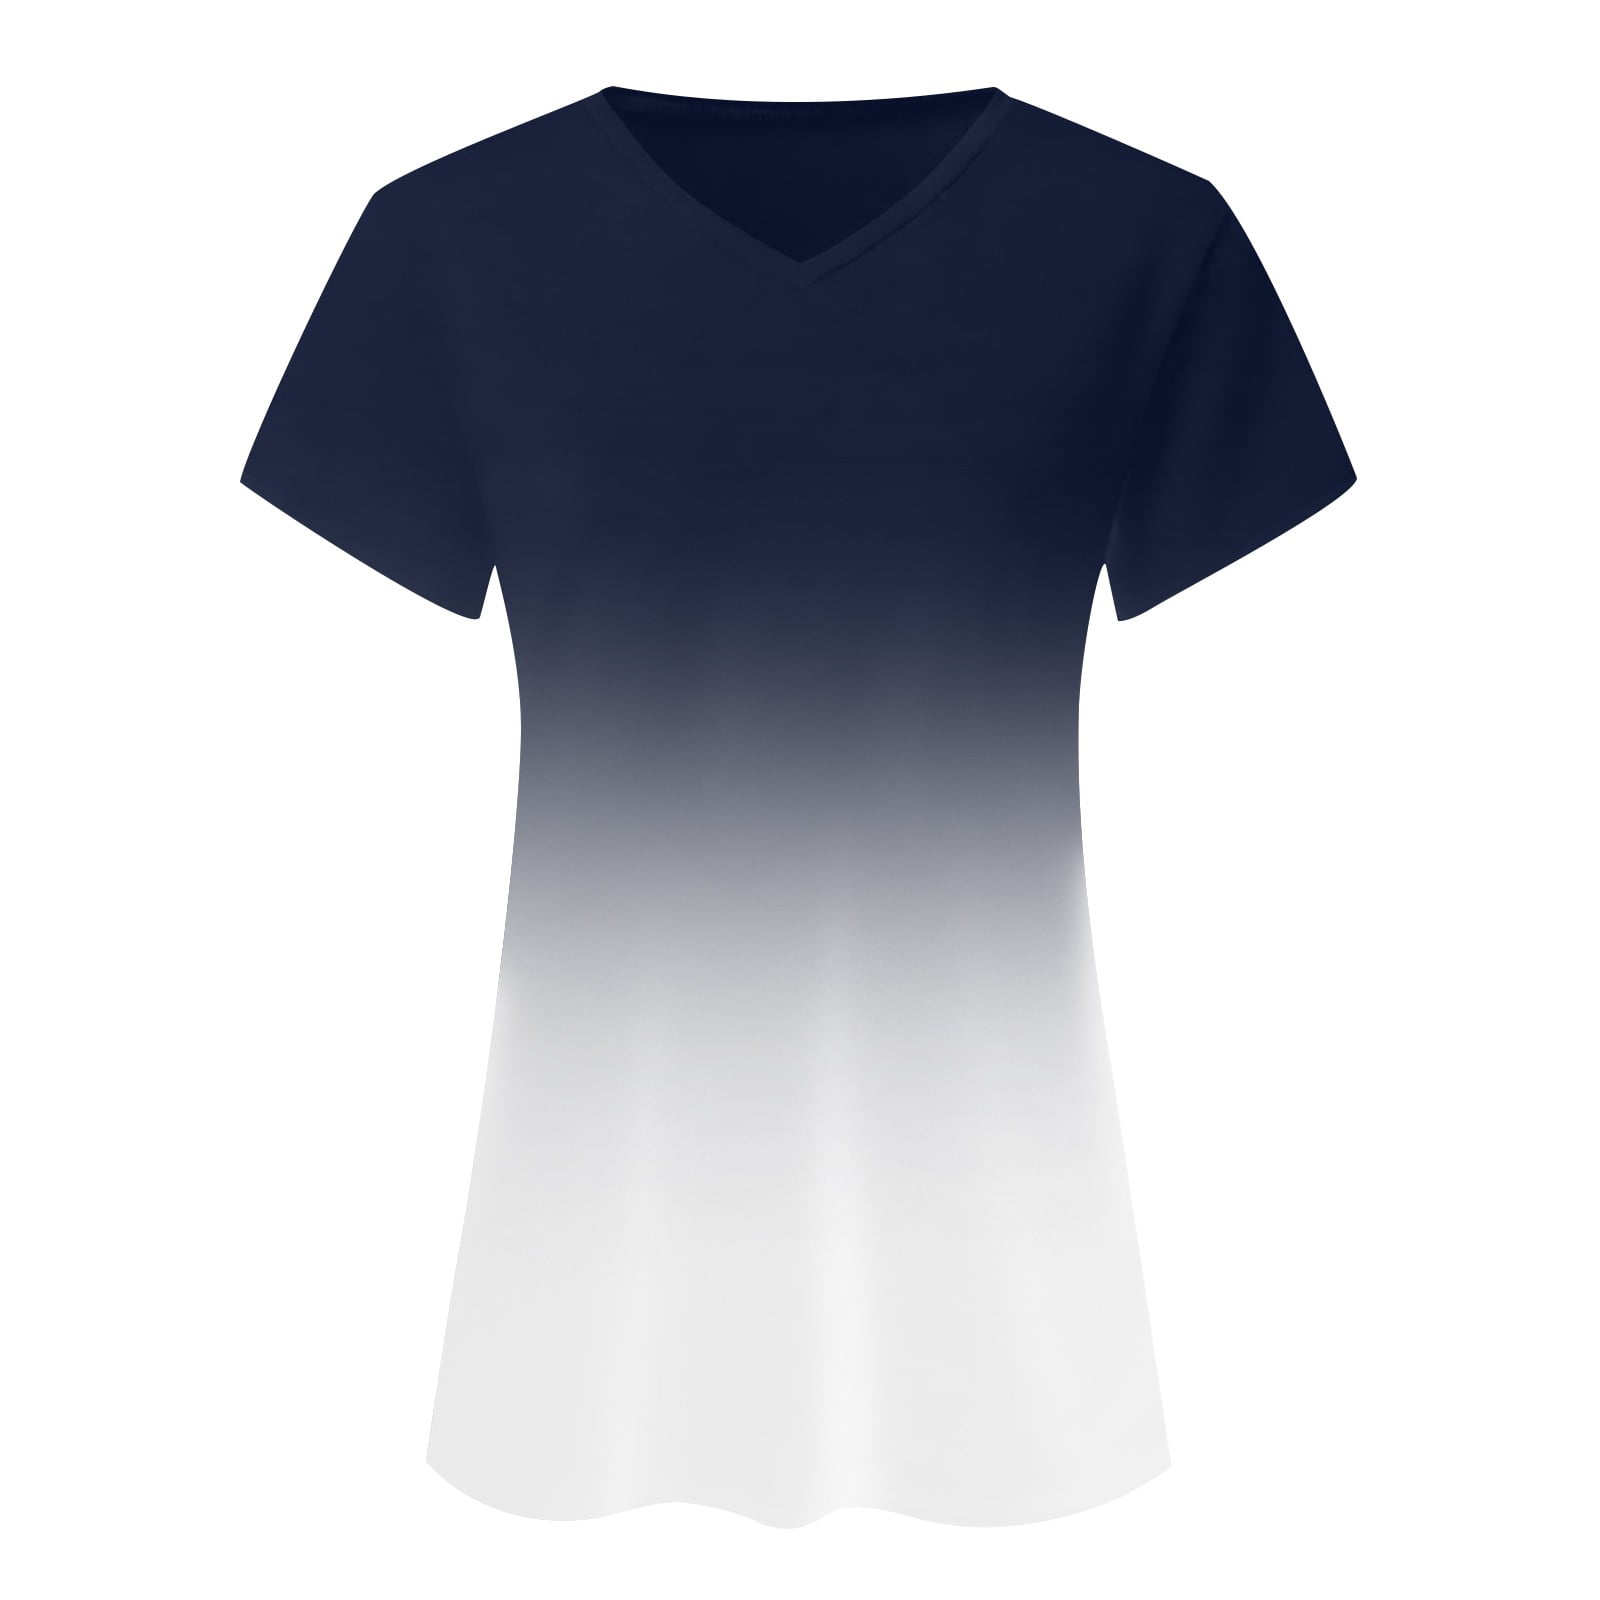 Tops for Women,Casual Gradient V-Neck T-Shirt Fashion Short Sleeve Loose T-Shirt Tops 